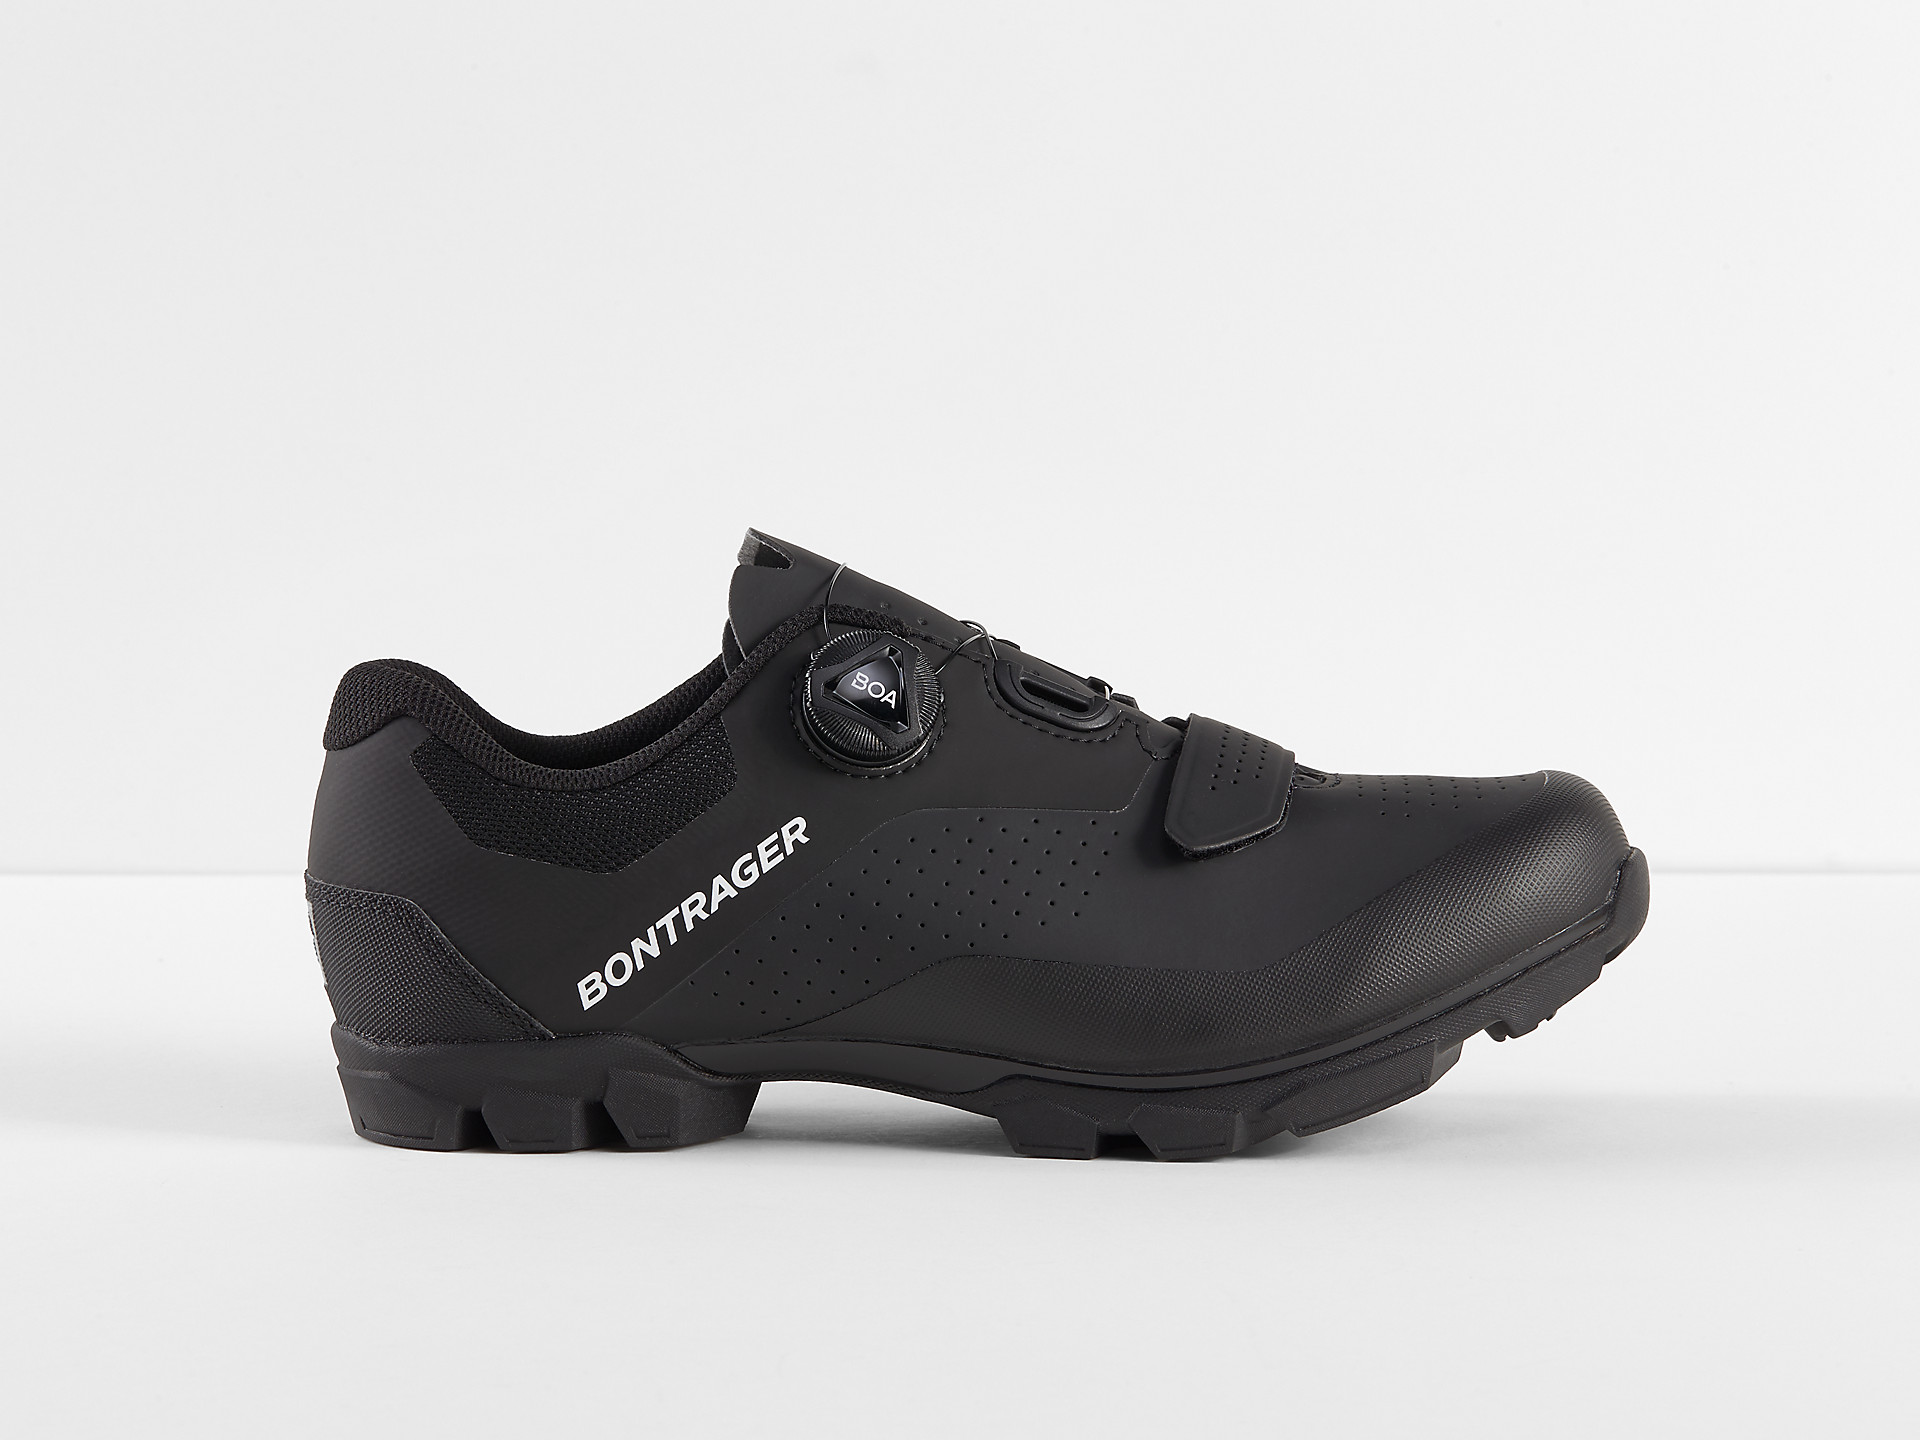 <a href="https://cycles-clement.be/product/bont-chaussures-foray-vtt-45-black/">BONT CHAUSSURES FORAY VTT 45 BLACK</a>